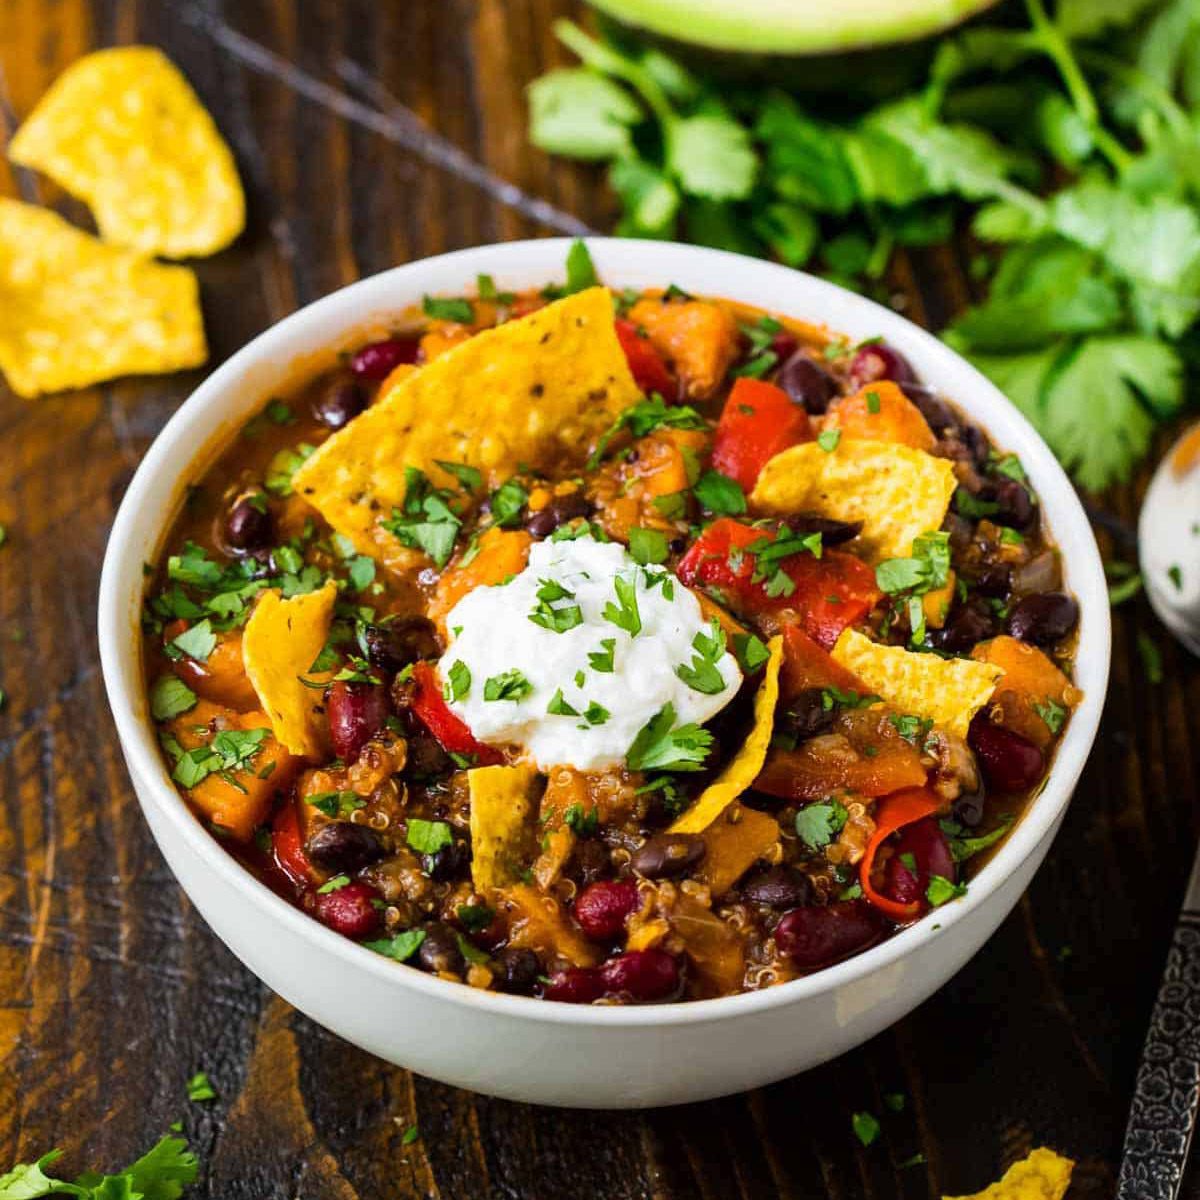 12 Simple Instant Pot Chili Recipes That'll Warm You Up